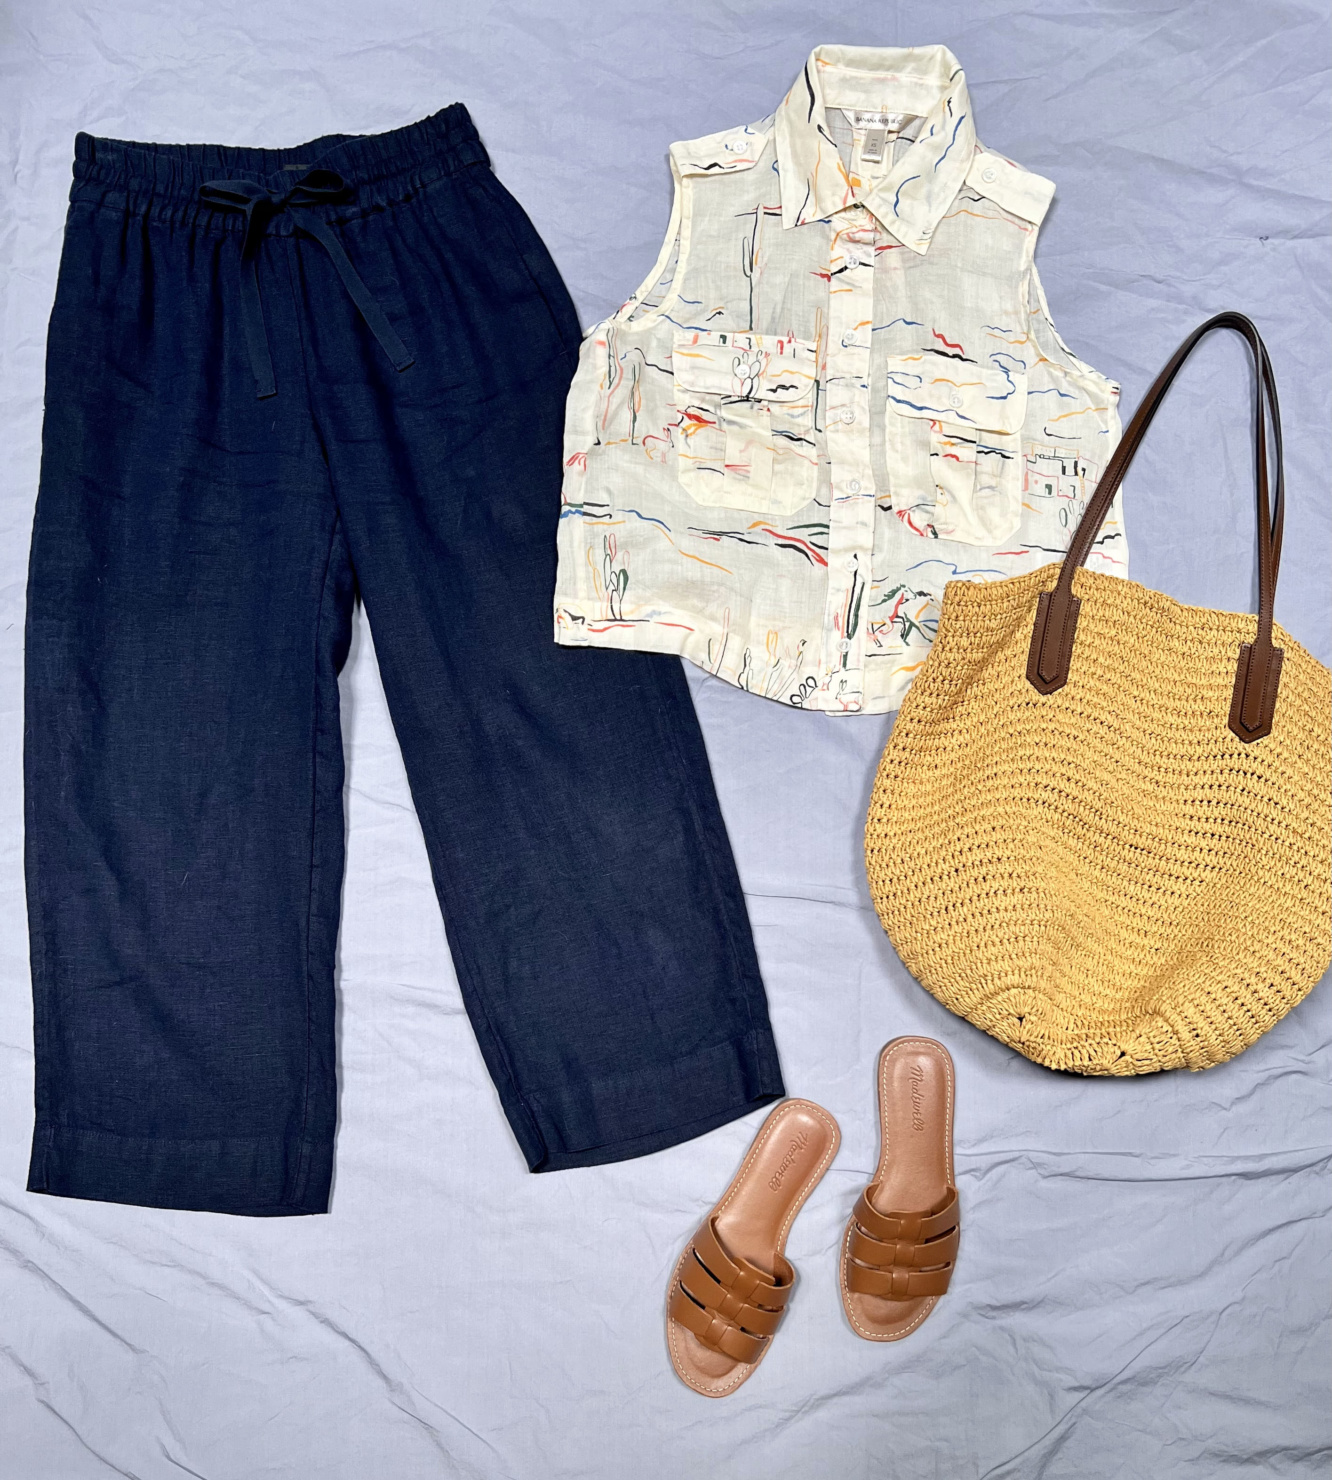 How to Build a Beach Capsule Wardrobe for an Extended Trip